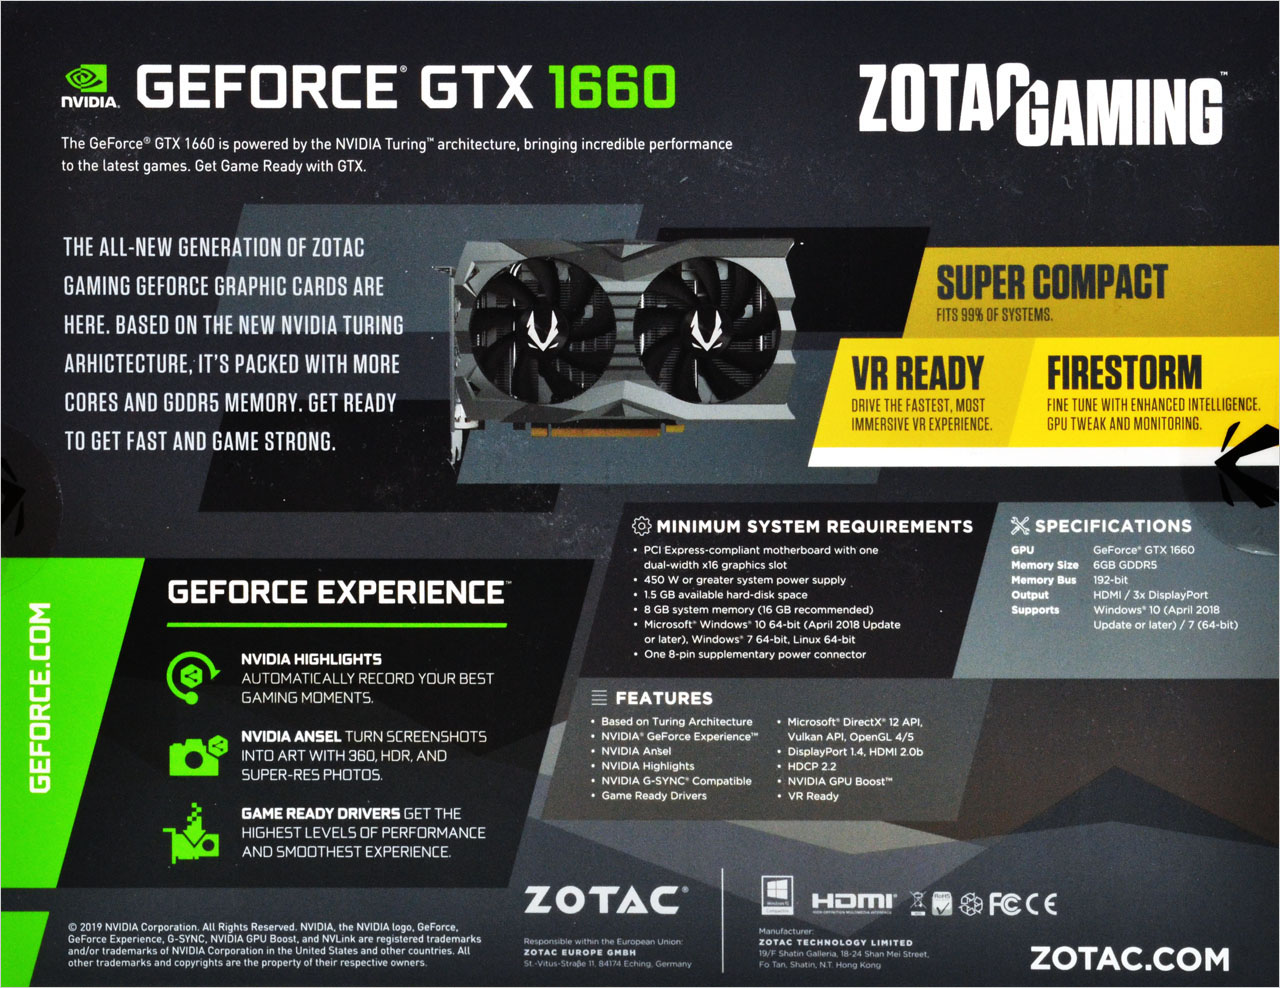 ZOTAC GeForce GTX 1660 AMP! Edition Backplate - Rear side package box